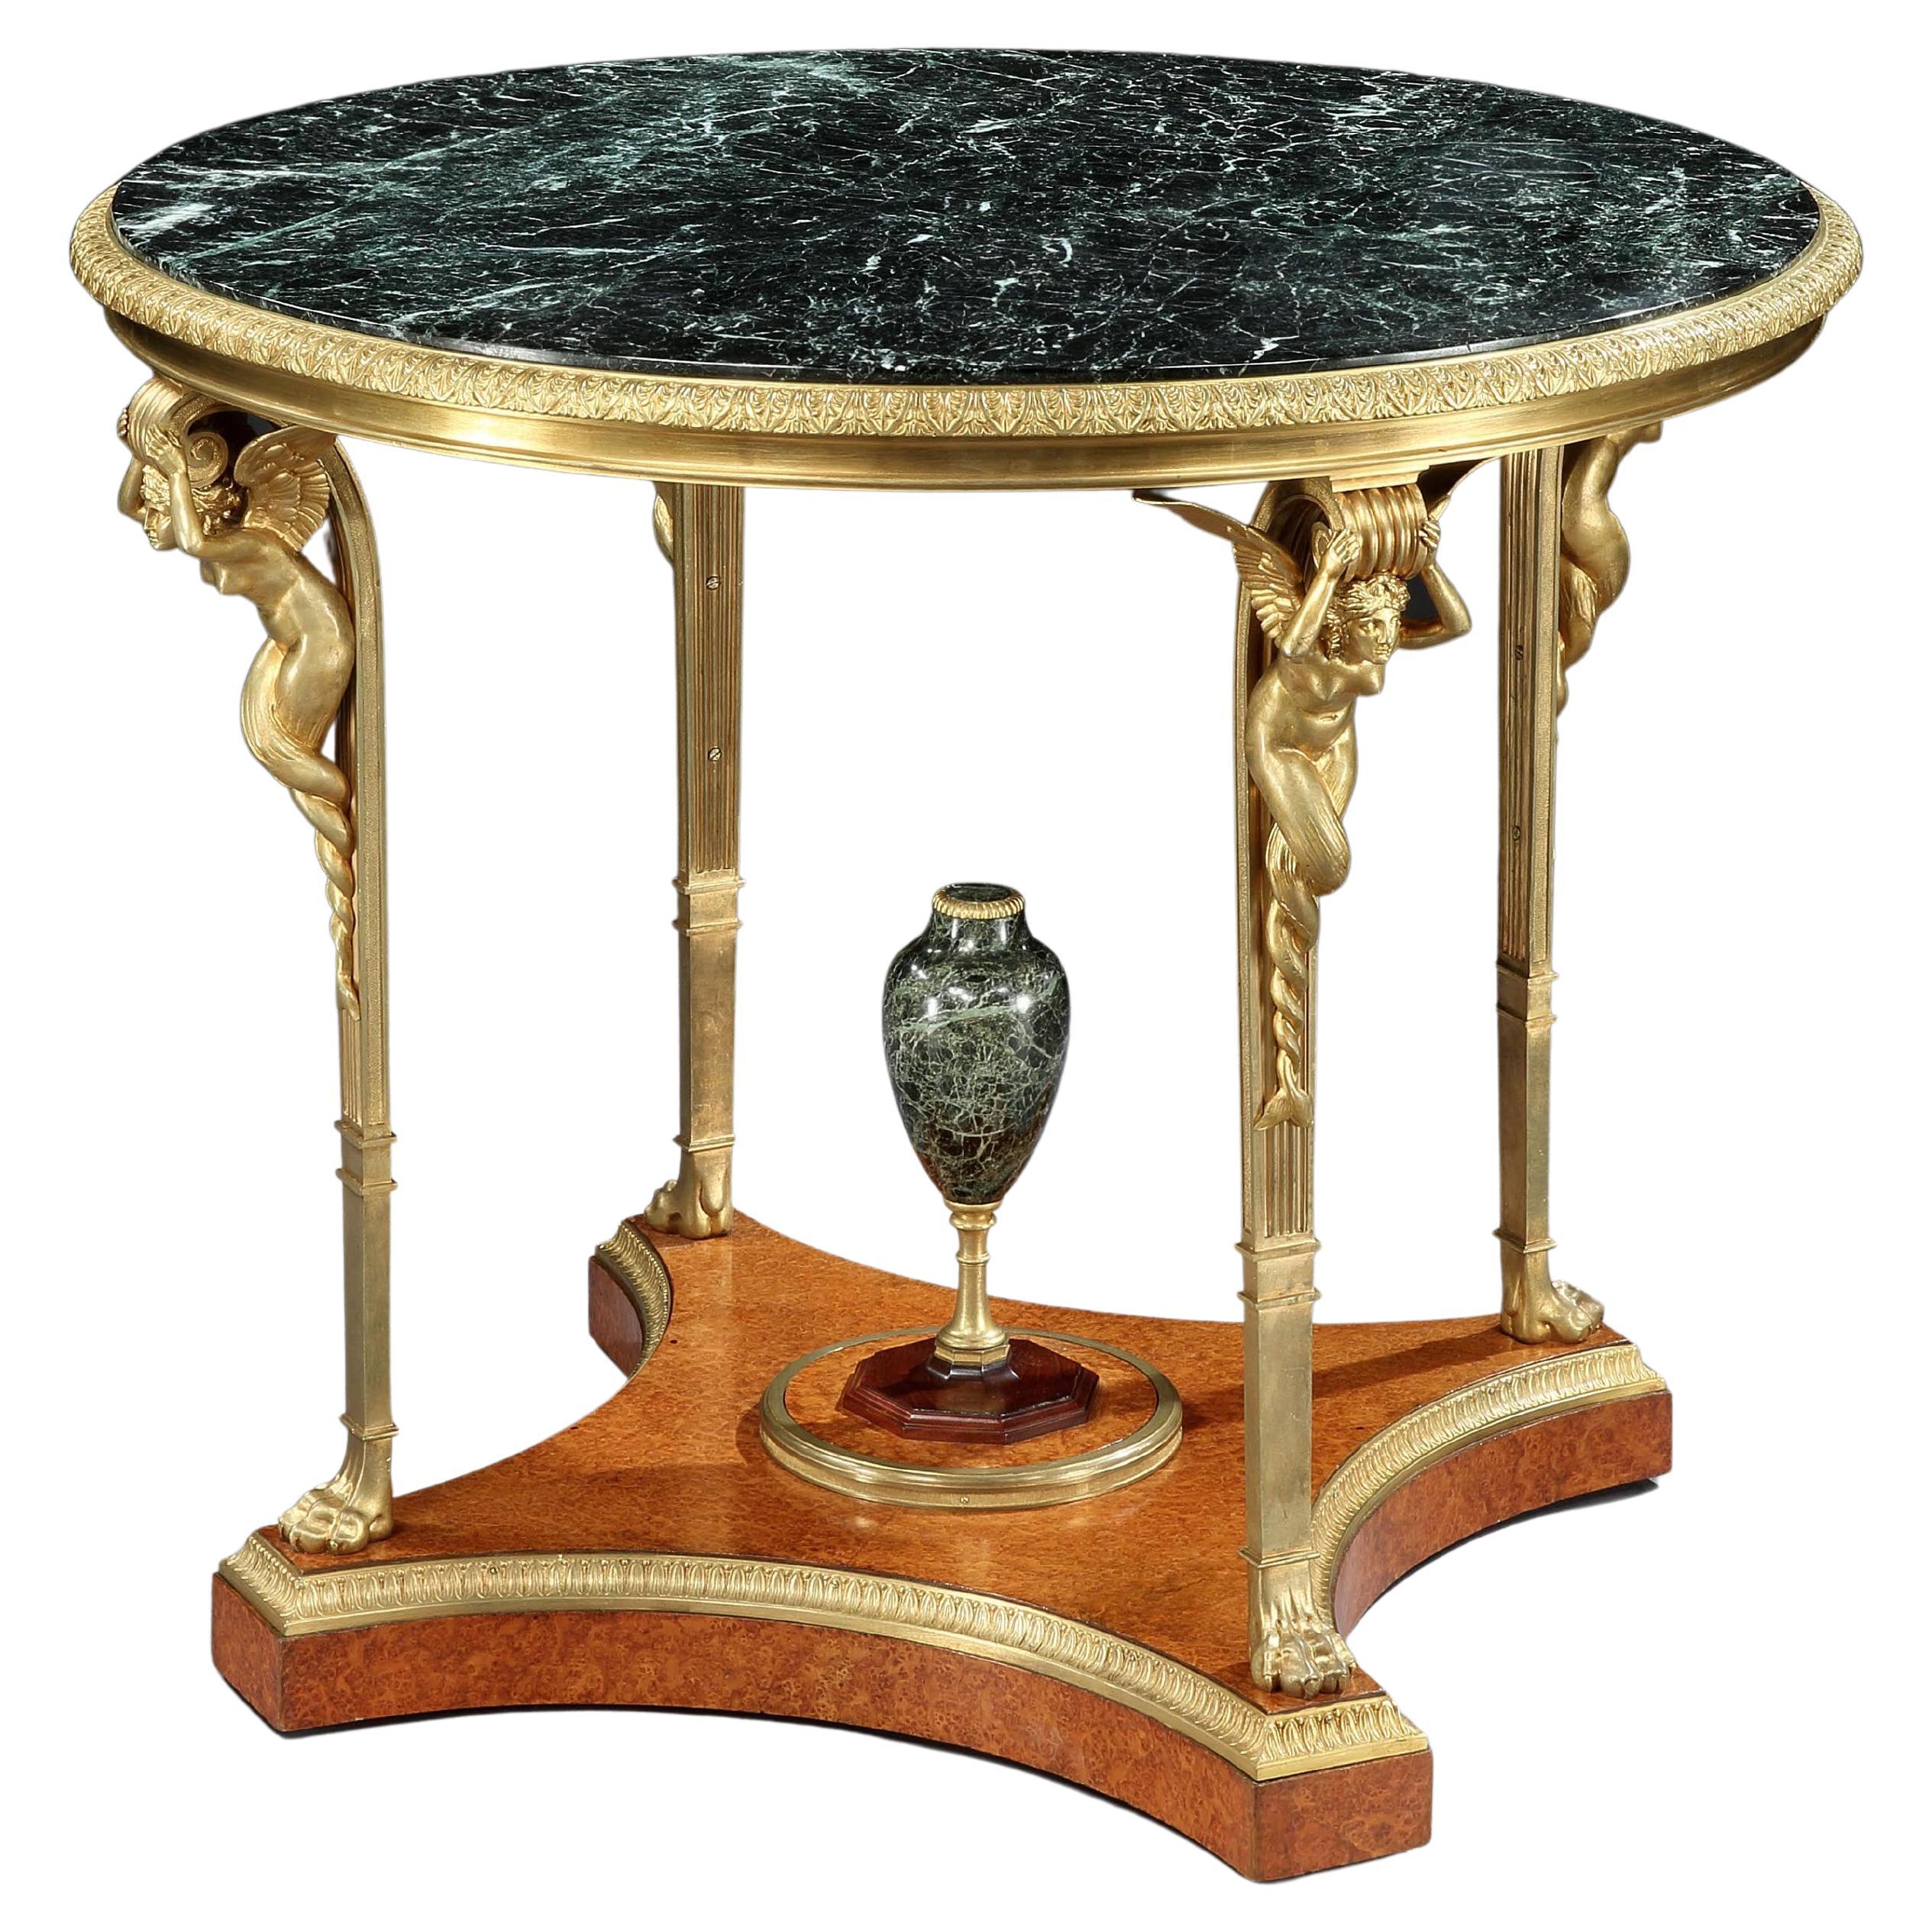 19th Century Empire Style Amboyna Gueridon Table attributed to Maison Millet